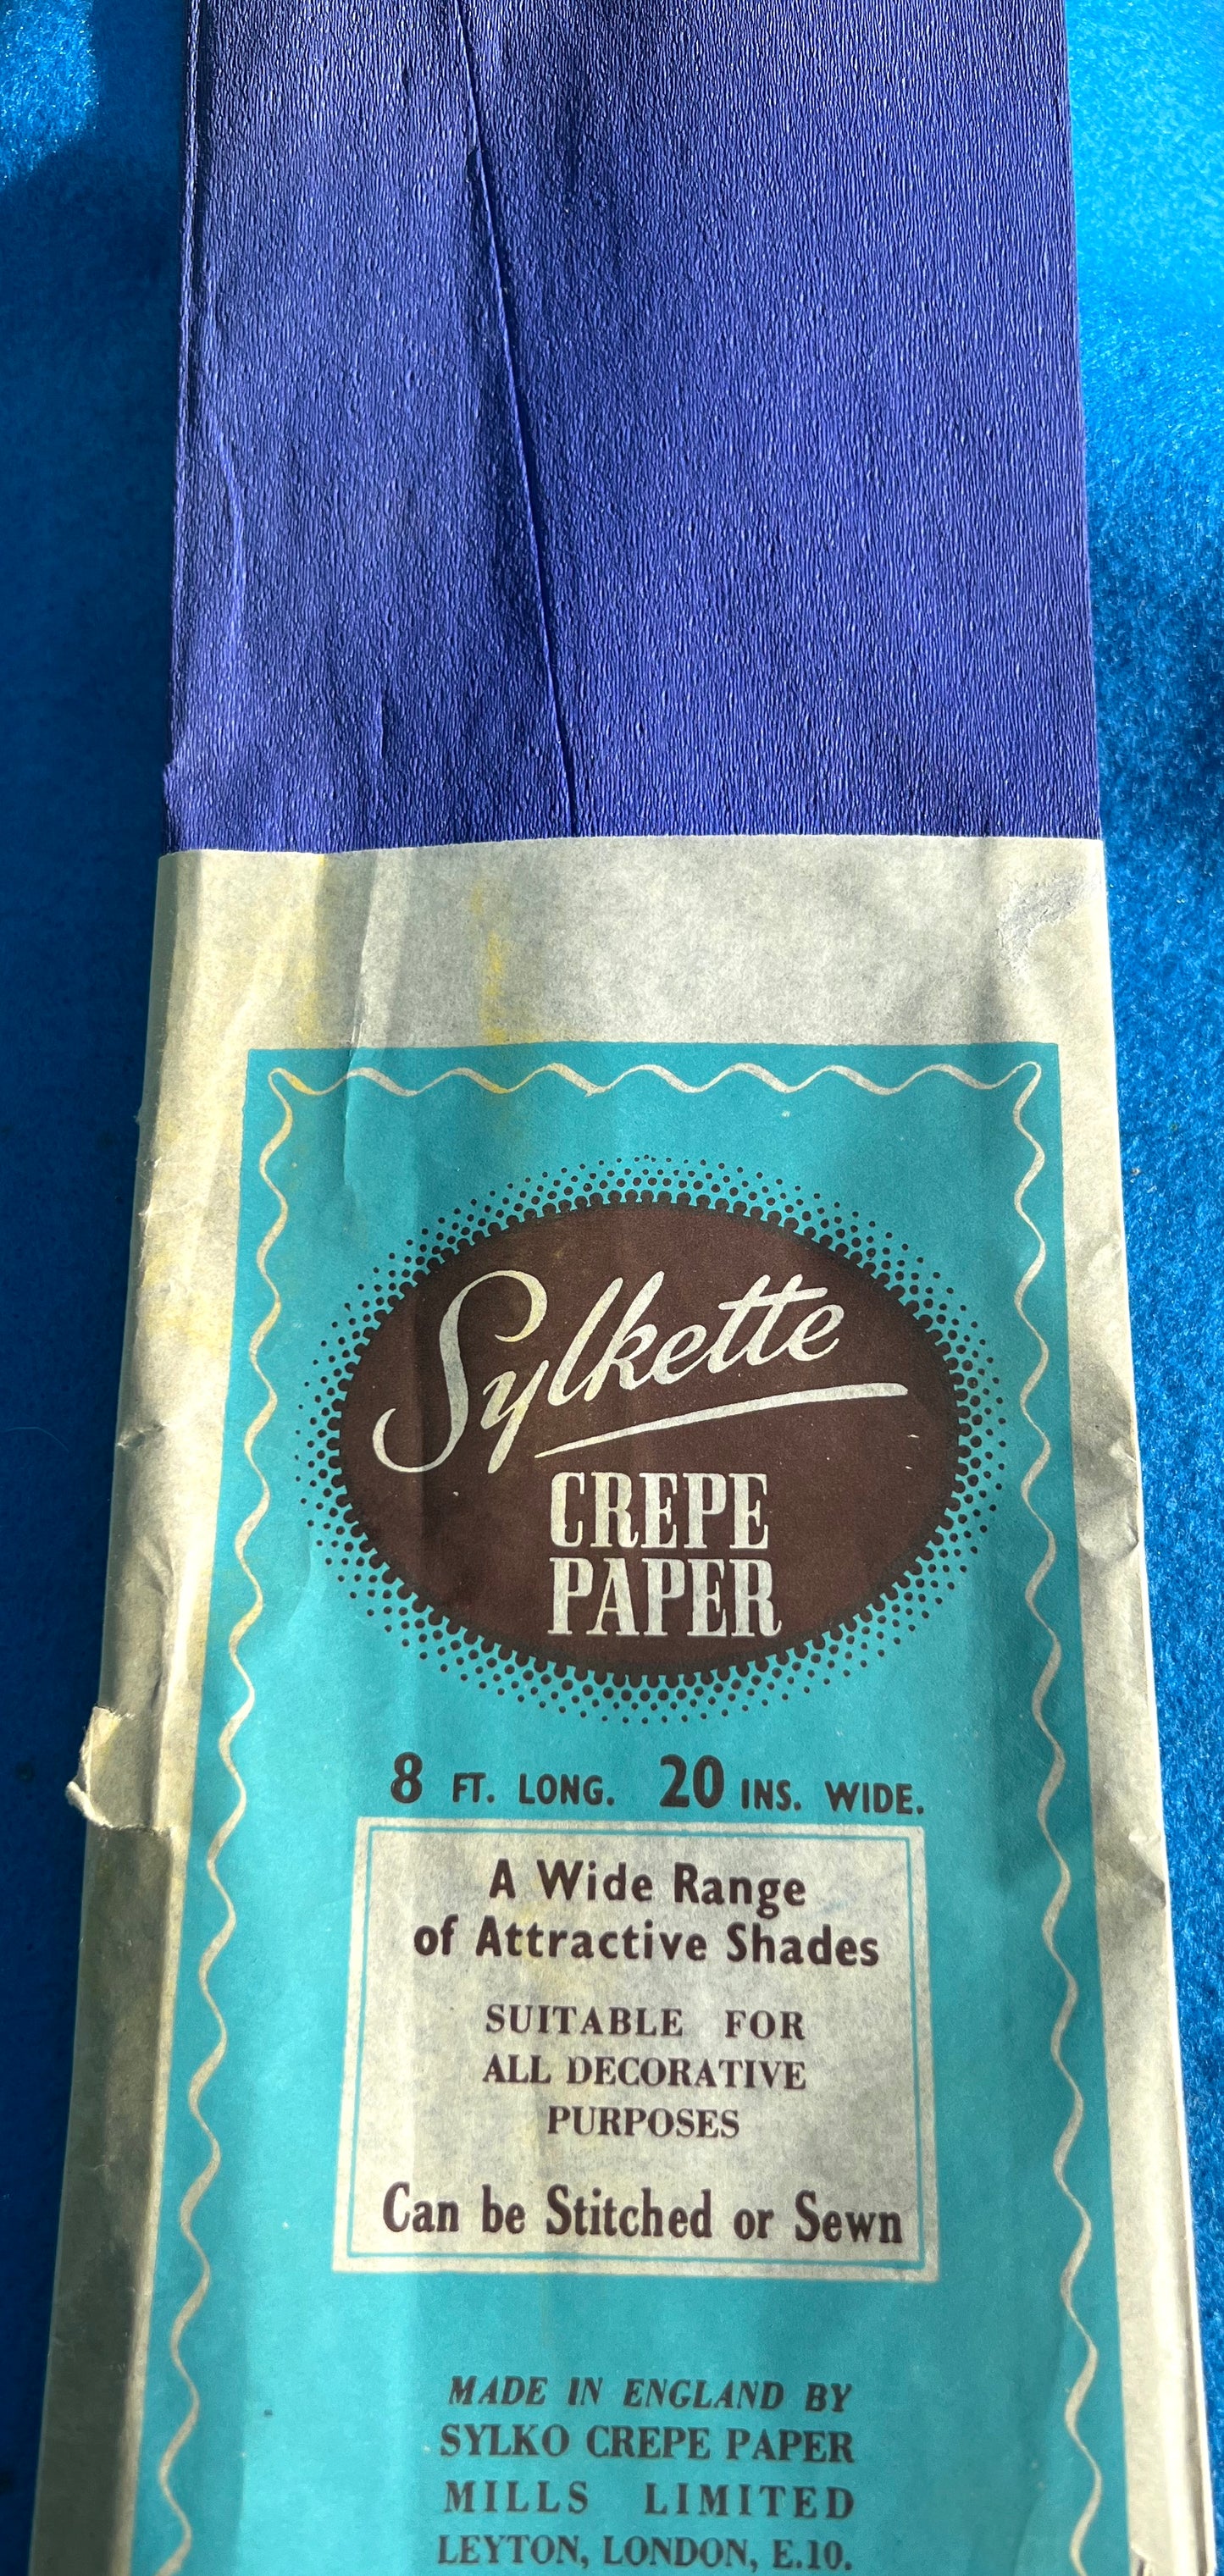 8 ft Vintage Crepe Paper 20" wide "SUITABLE FOR ALL DECORATIVE PURPOSES"